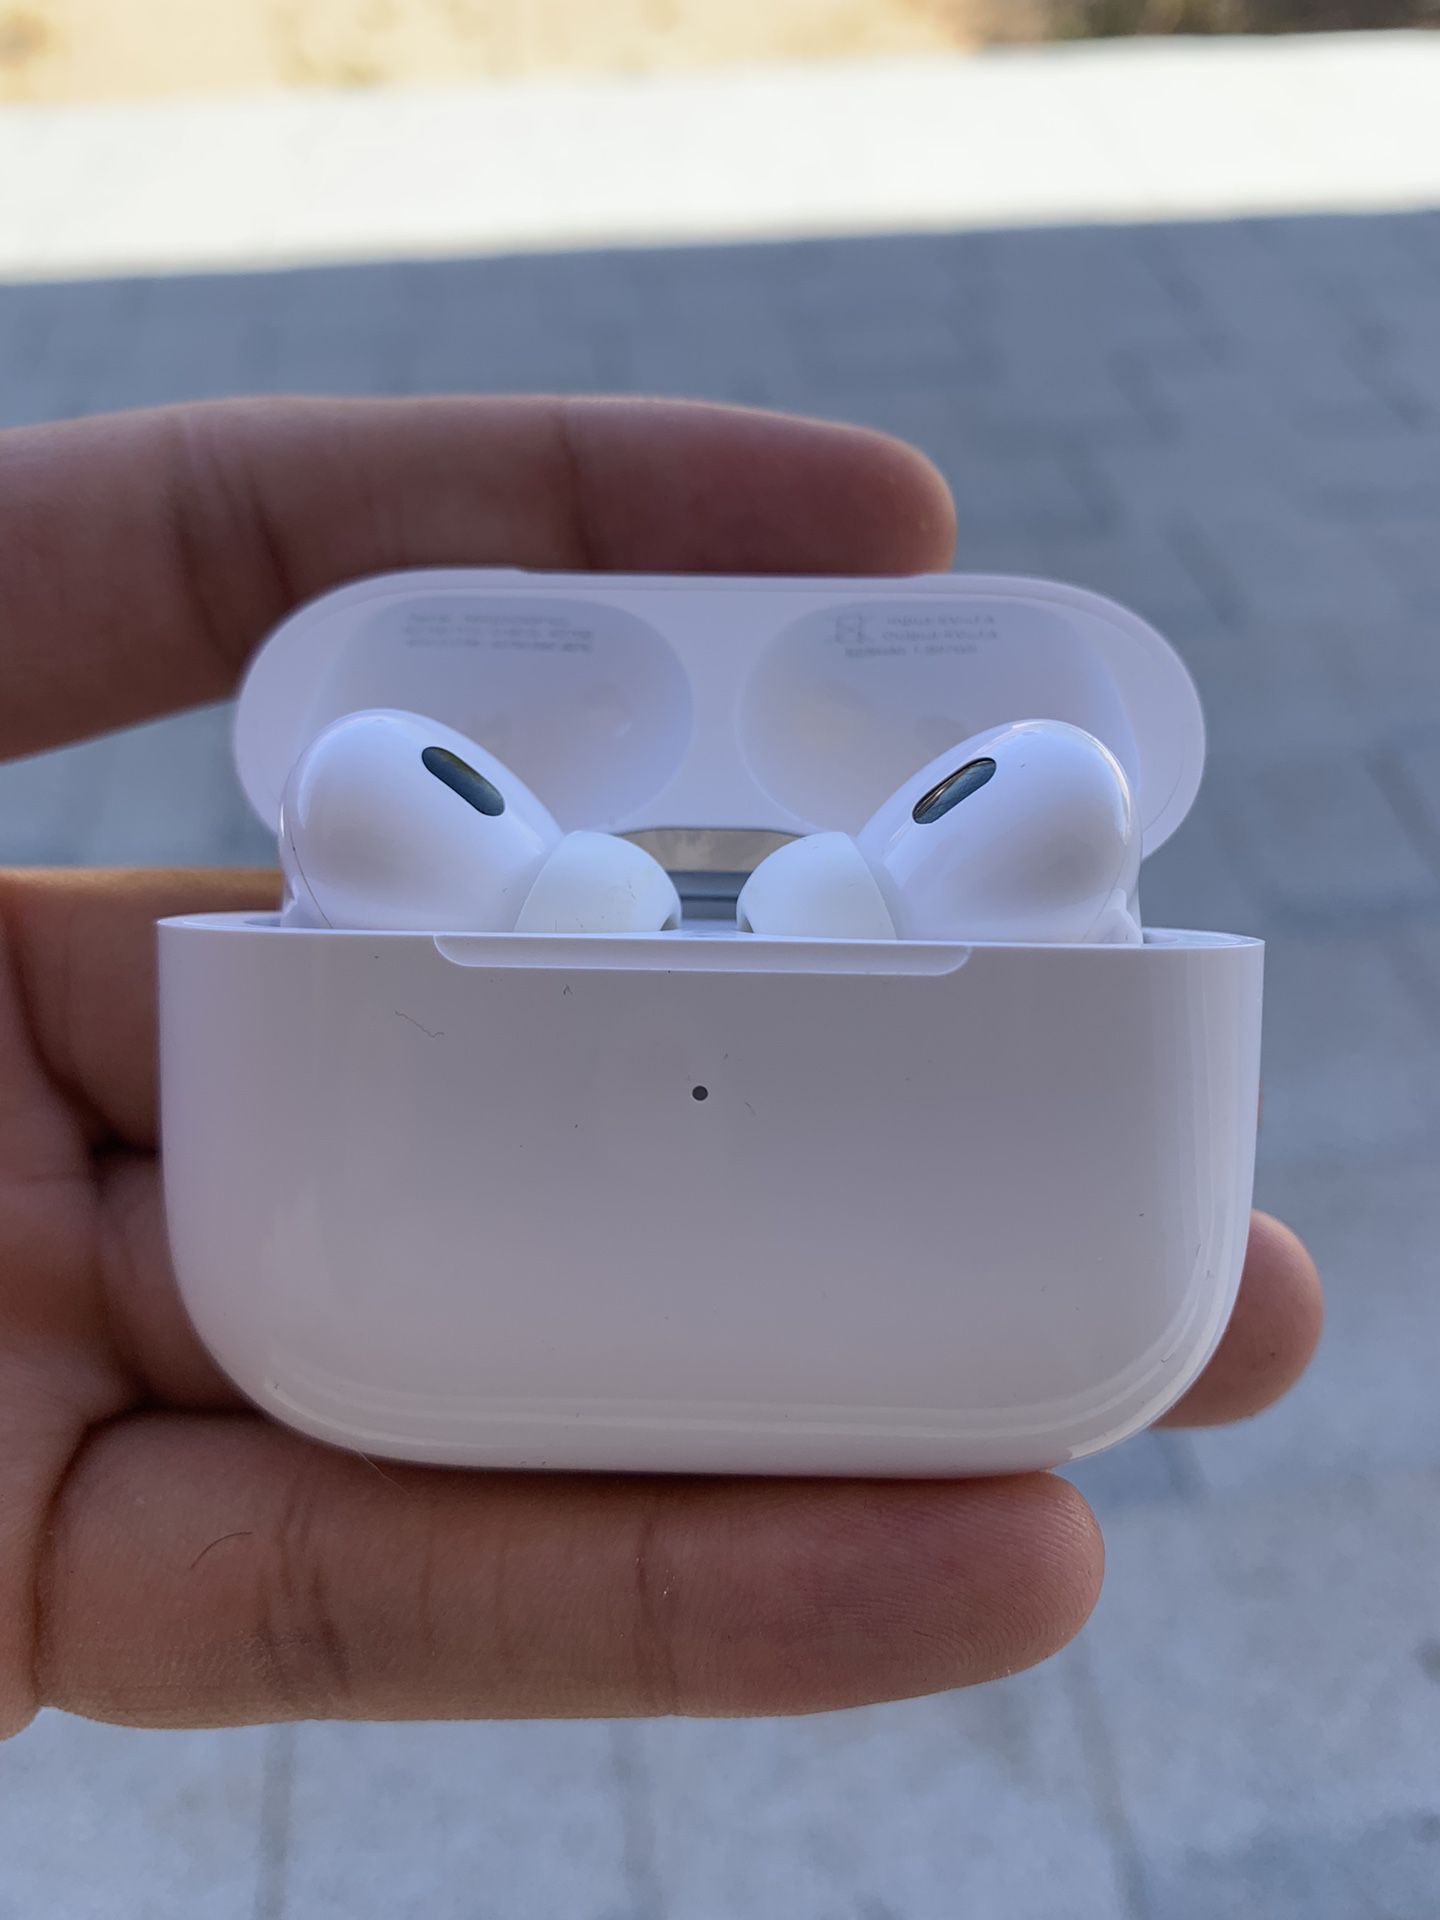 AirPods Pro 2nd generation with active noise cancellation 